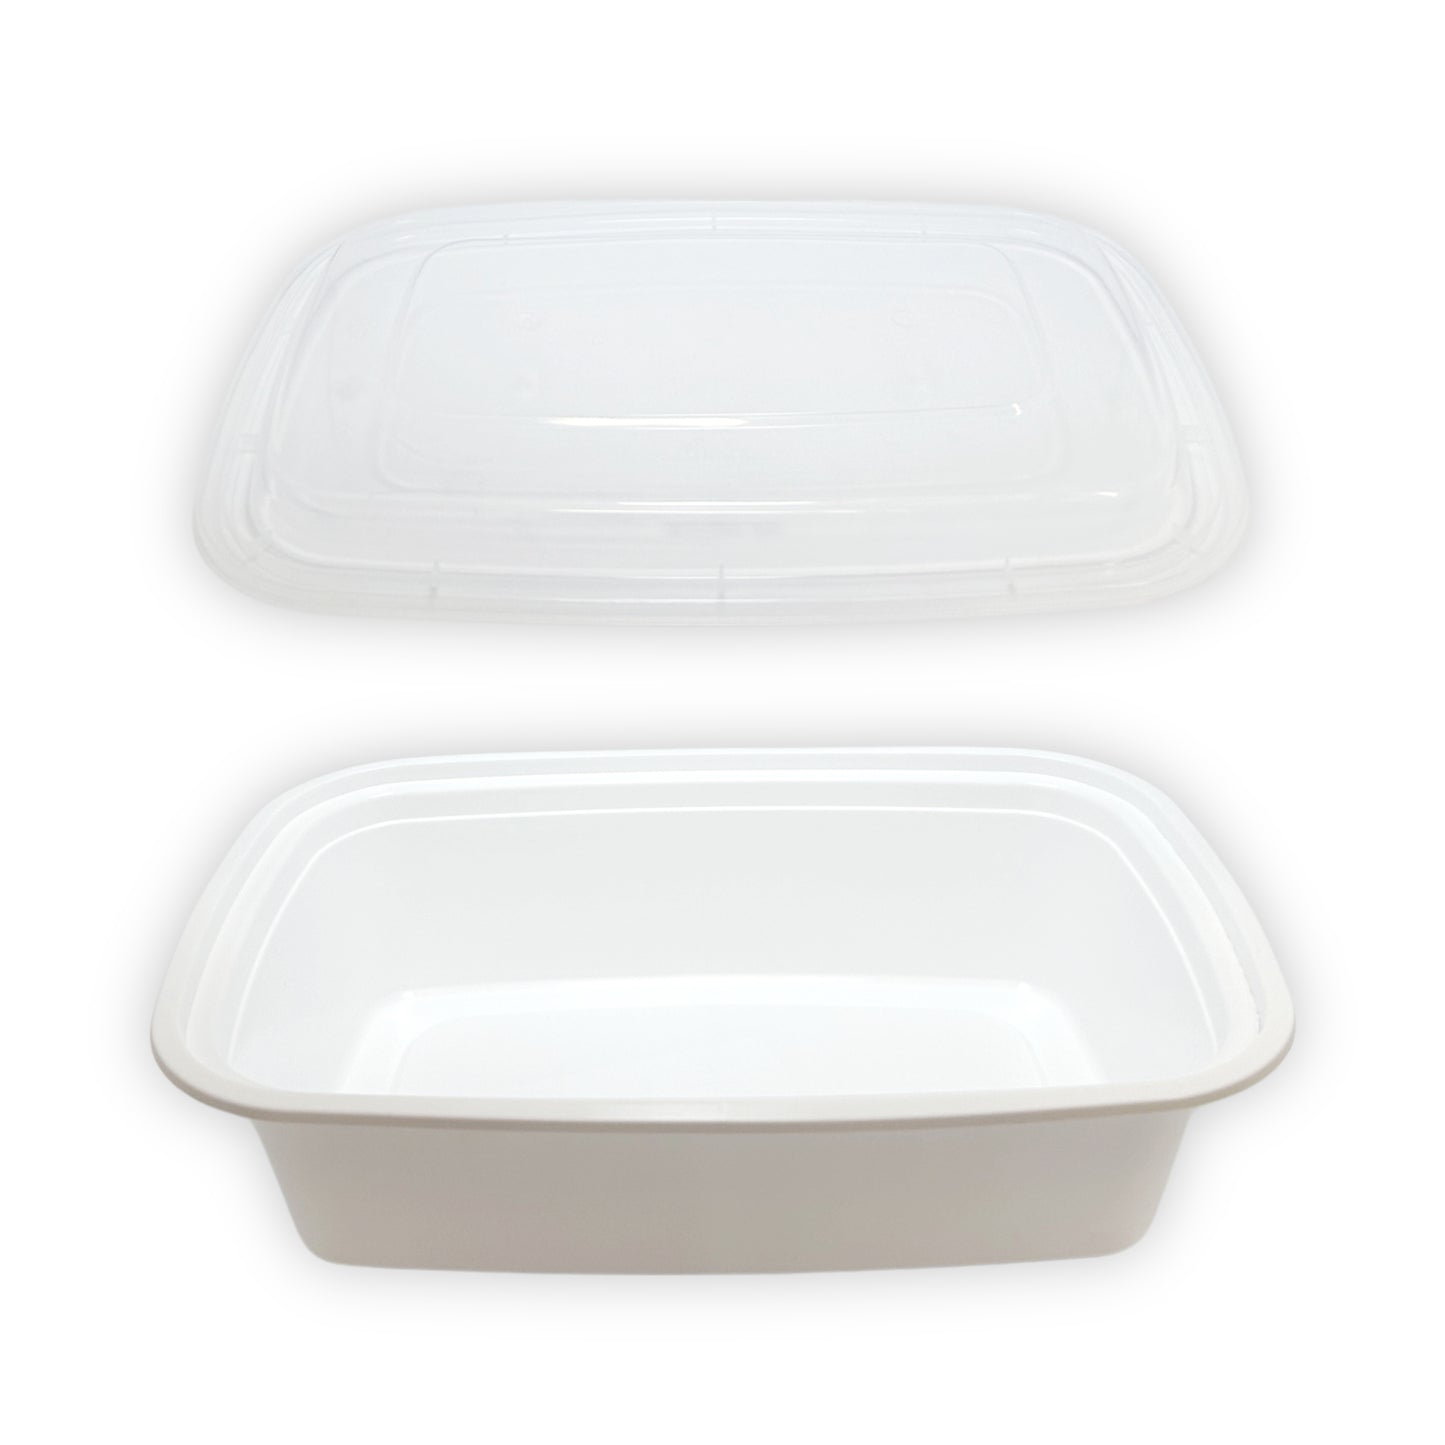 KIS-KY38G | 150sets 38oz, 1124ml White PP Rectangle Container with Clear Lids Combo; $0.258/set